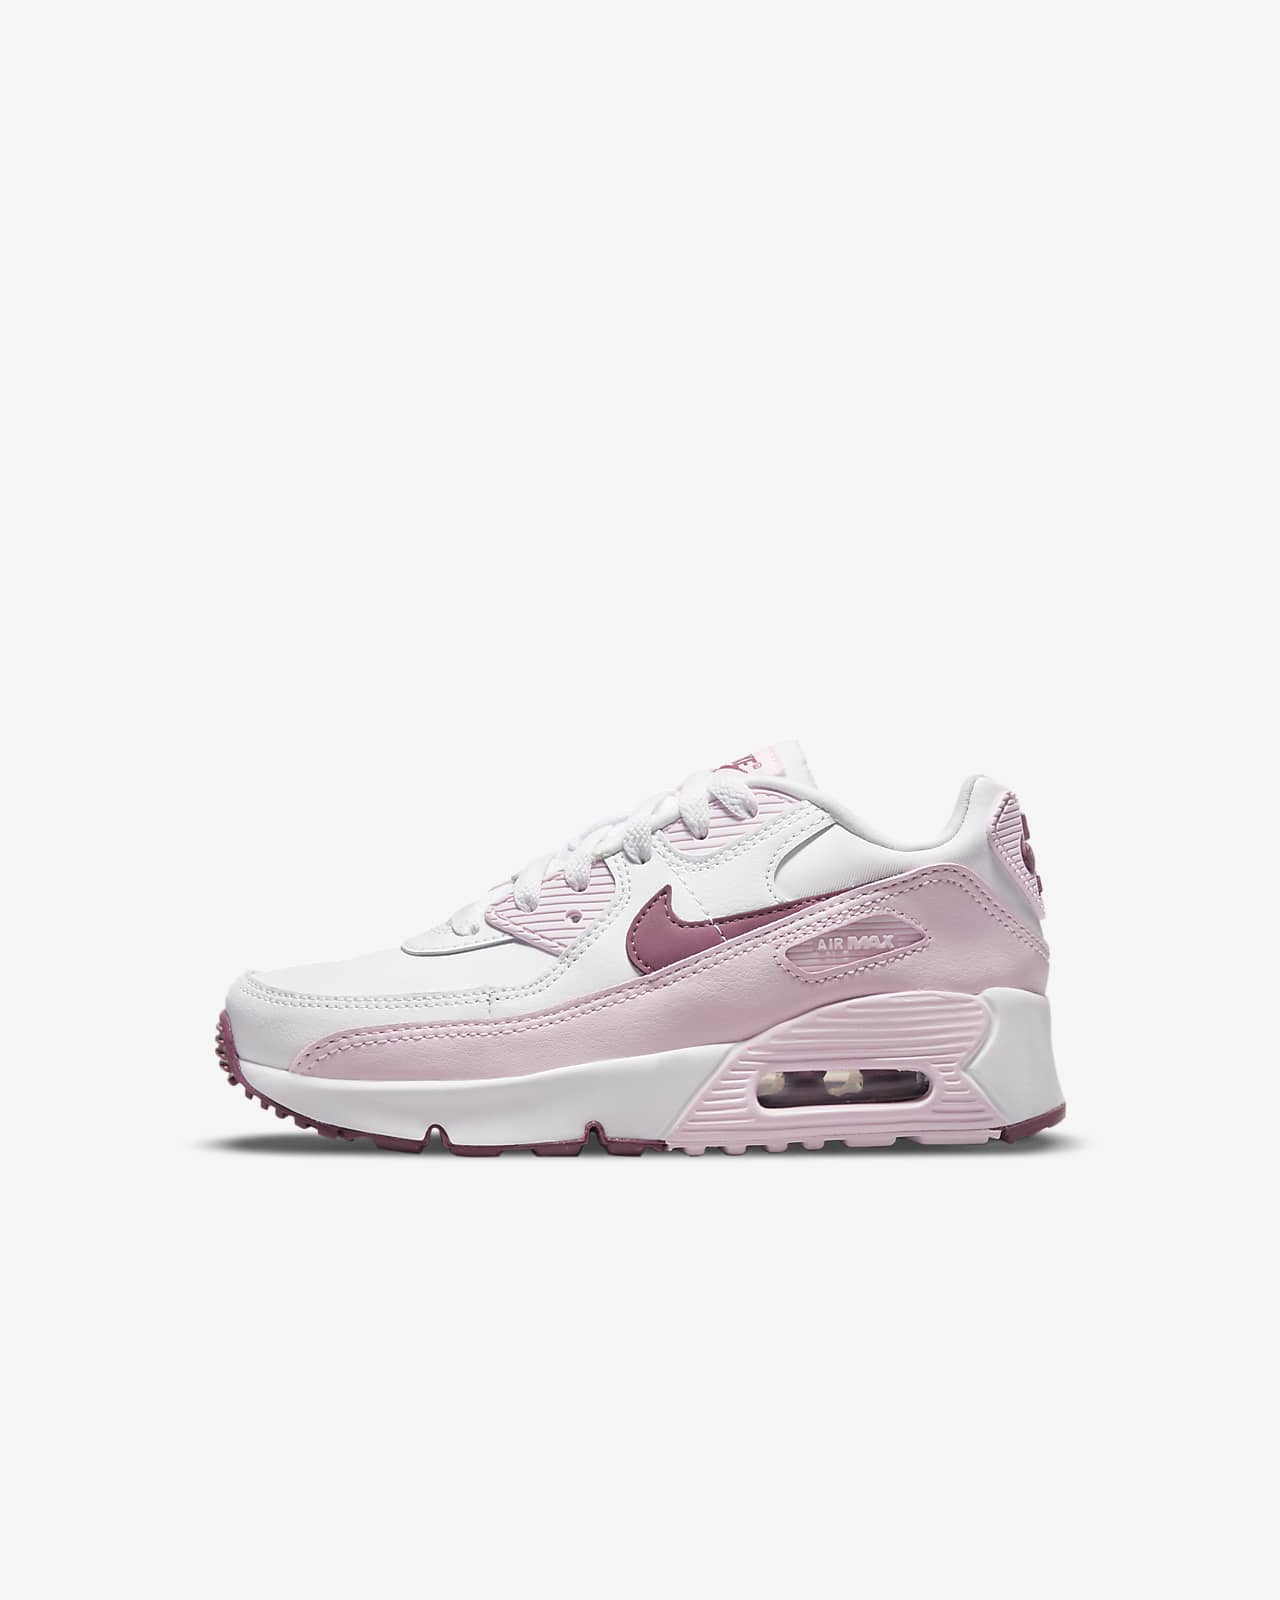 Nike Air Max 90 Younger Kids' Shoe